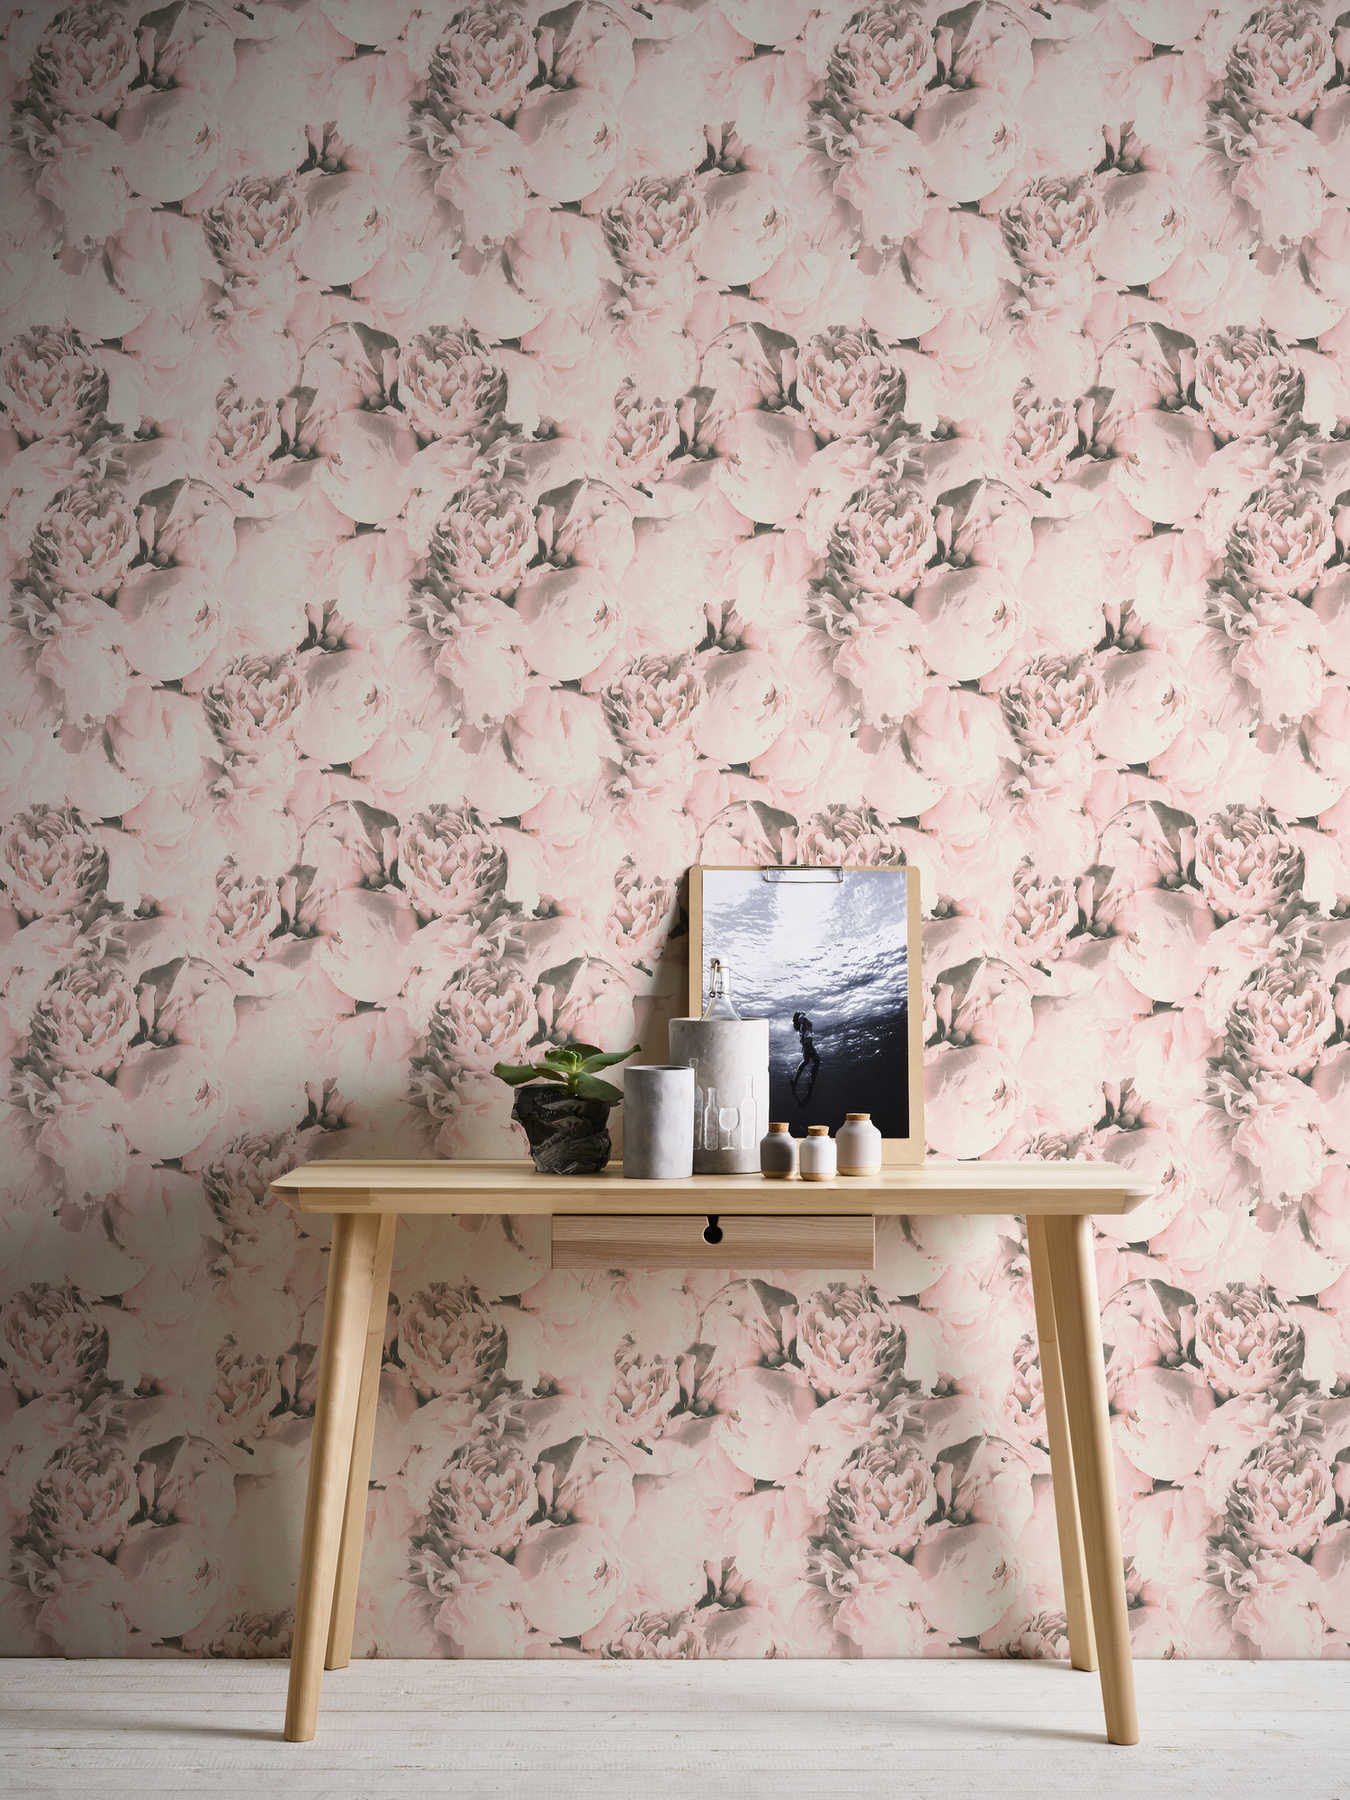             Floral wallpaper roses with shimmer effect - pink, cream
        